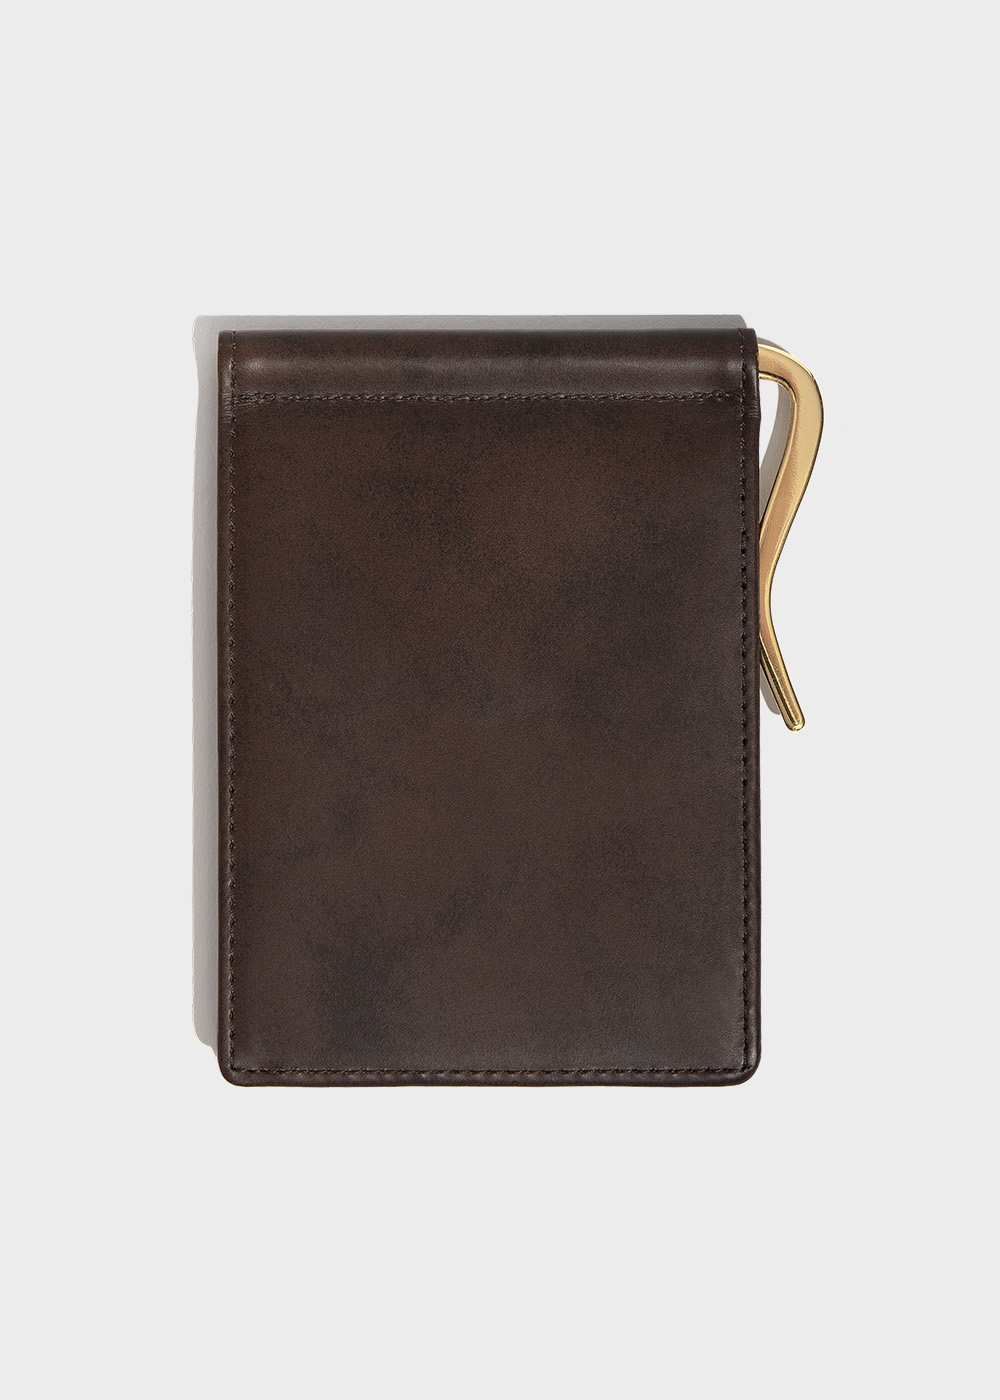 Cow Leather Money Clip Wallet _ marble brown